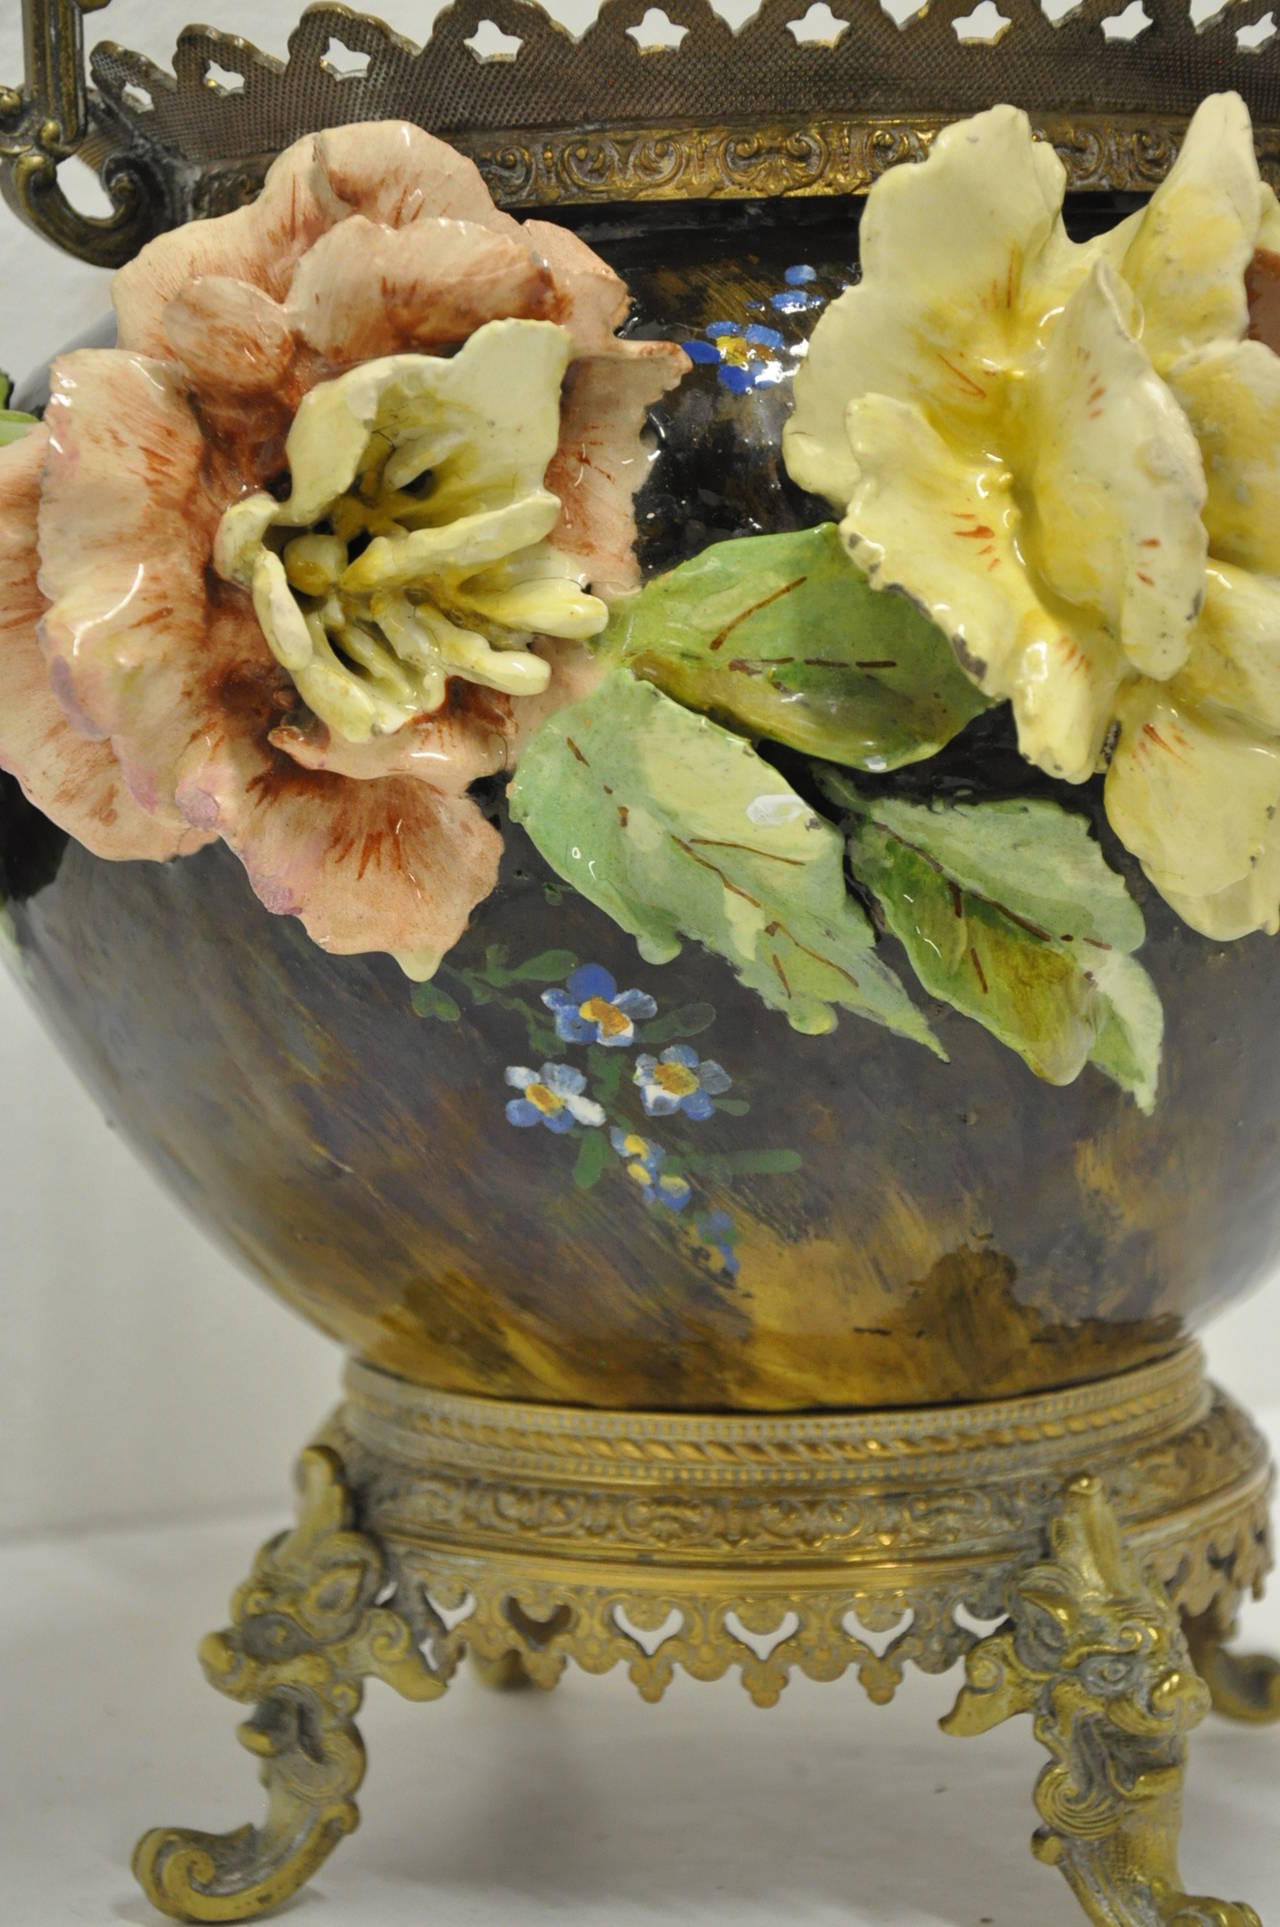 19th century barbotine majolica cache-pot  featuring relief motifs with painted flowers and leaves. The vase sits on a bronze base with bronze handles on top (circa: 1860)